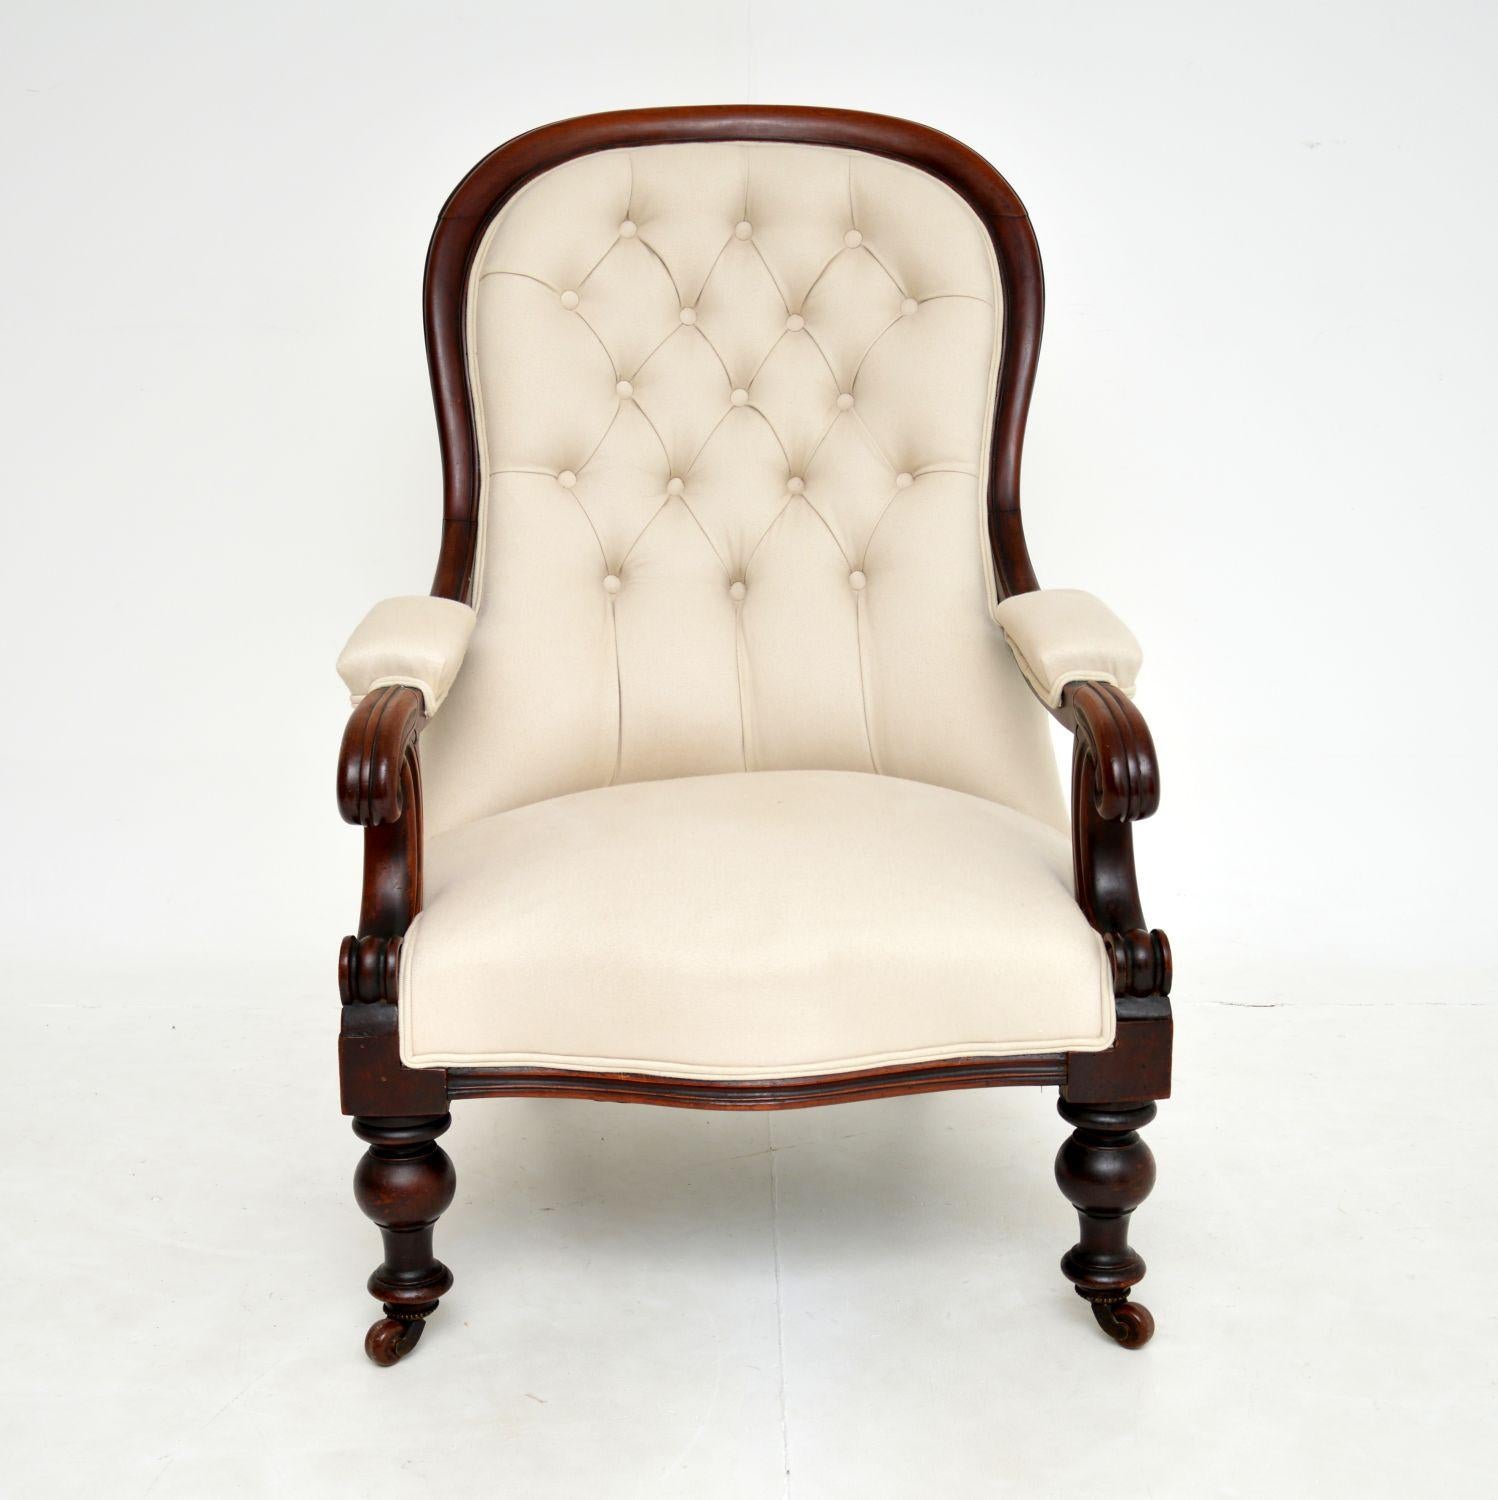 An excellent antique Victorian spoon back armchair with a very well made solid wood frame. This was made in England & dates from around the 1850-1860’s period.

The quality is fantastic, it is very well designed and is also extremely comfortable.